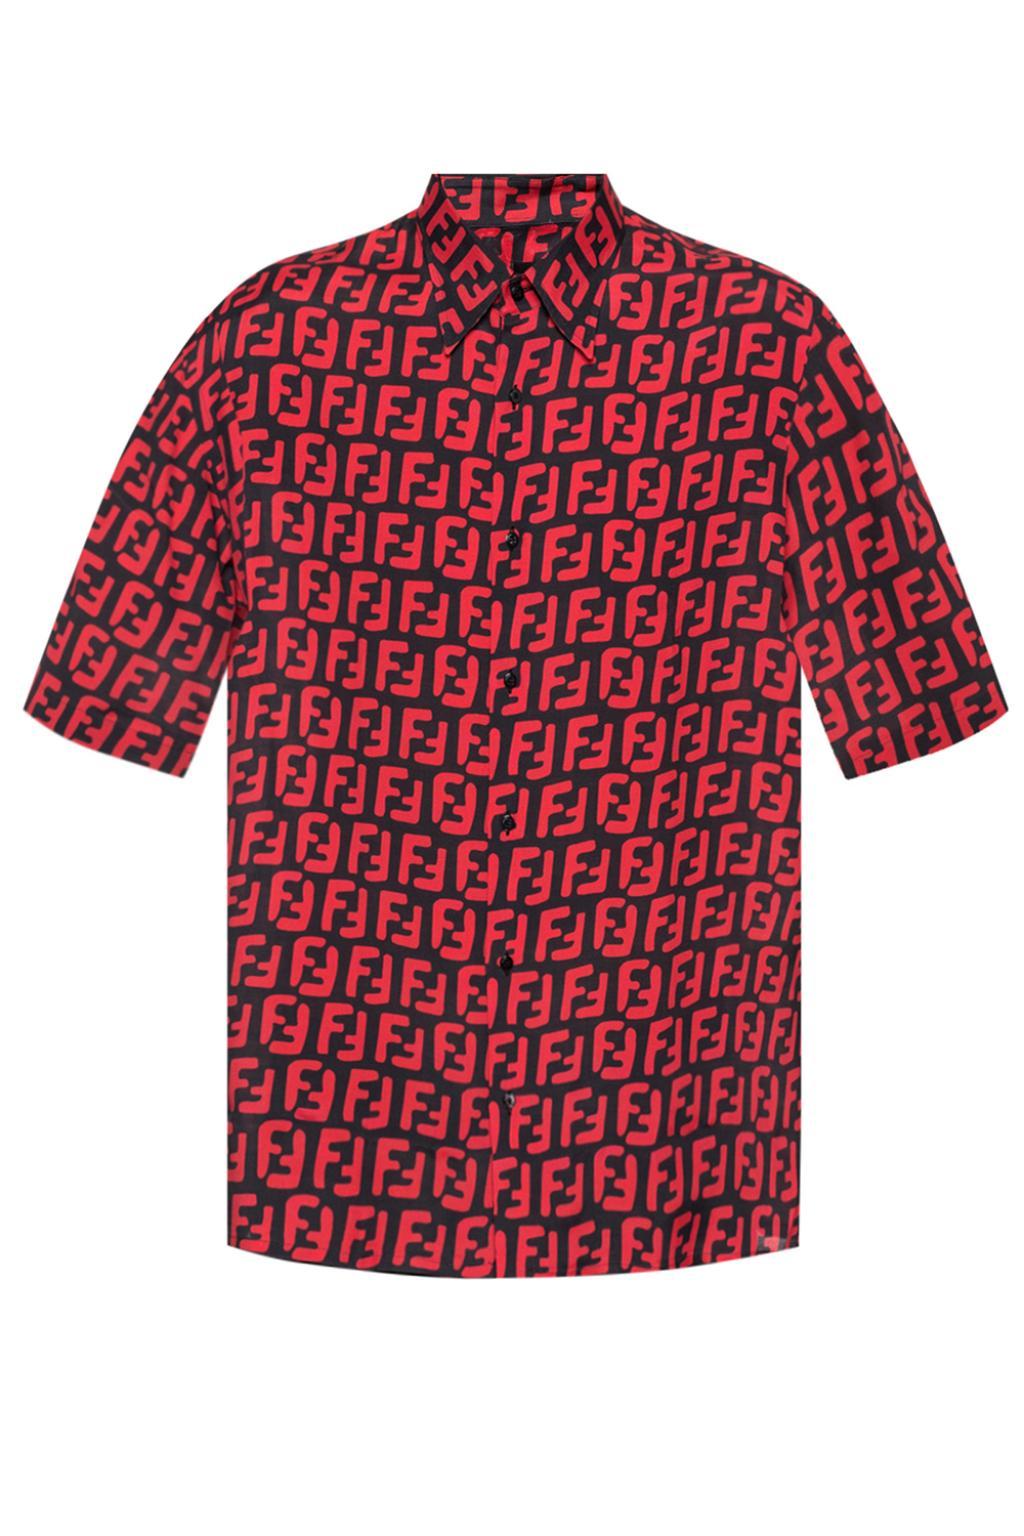 Fendi Synthetic Ff Logo Shirt in Red for Men - Lyst